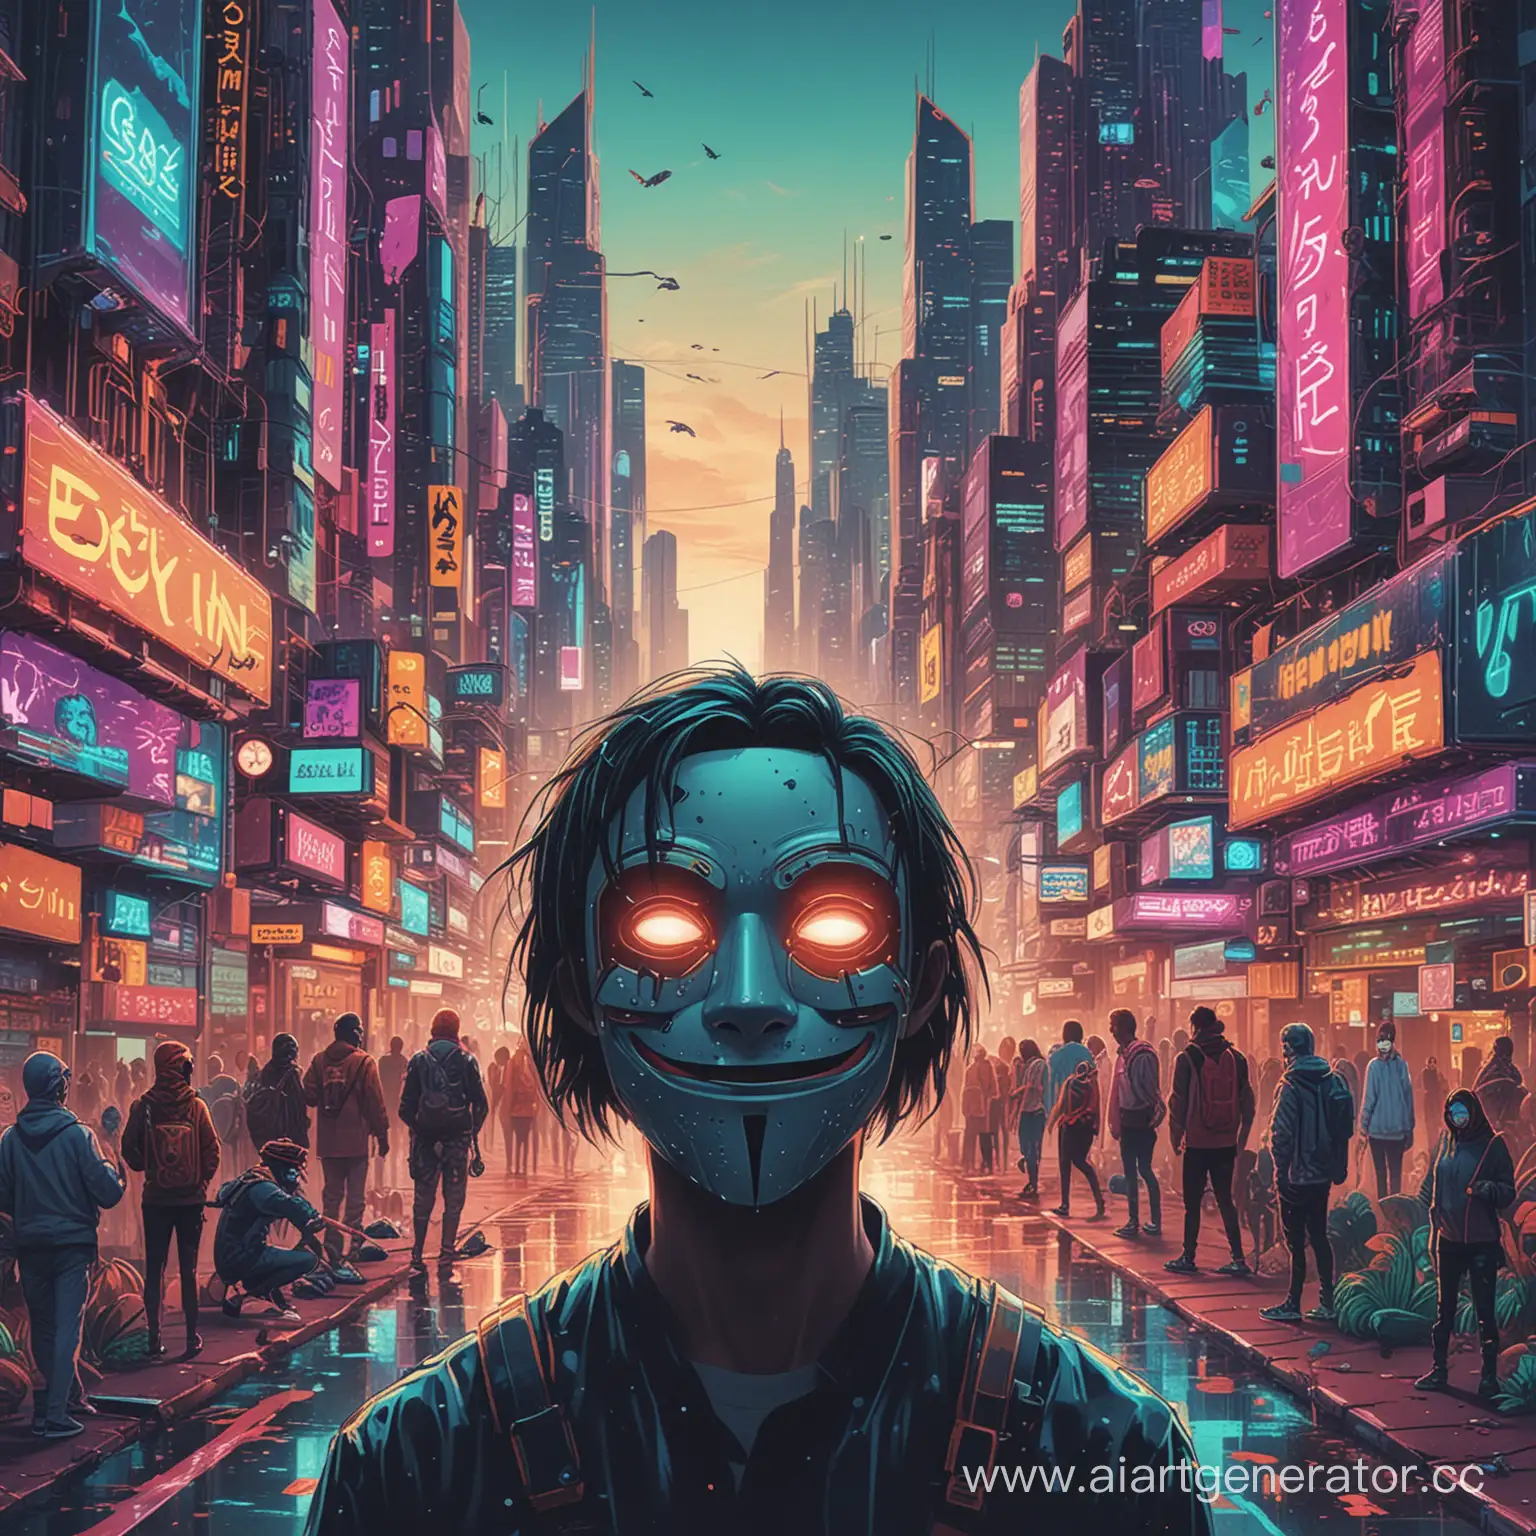 Futuristic-Cityscape-with-Sinister-Creatures-and-Creepy-Smiling-Masks